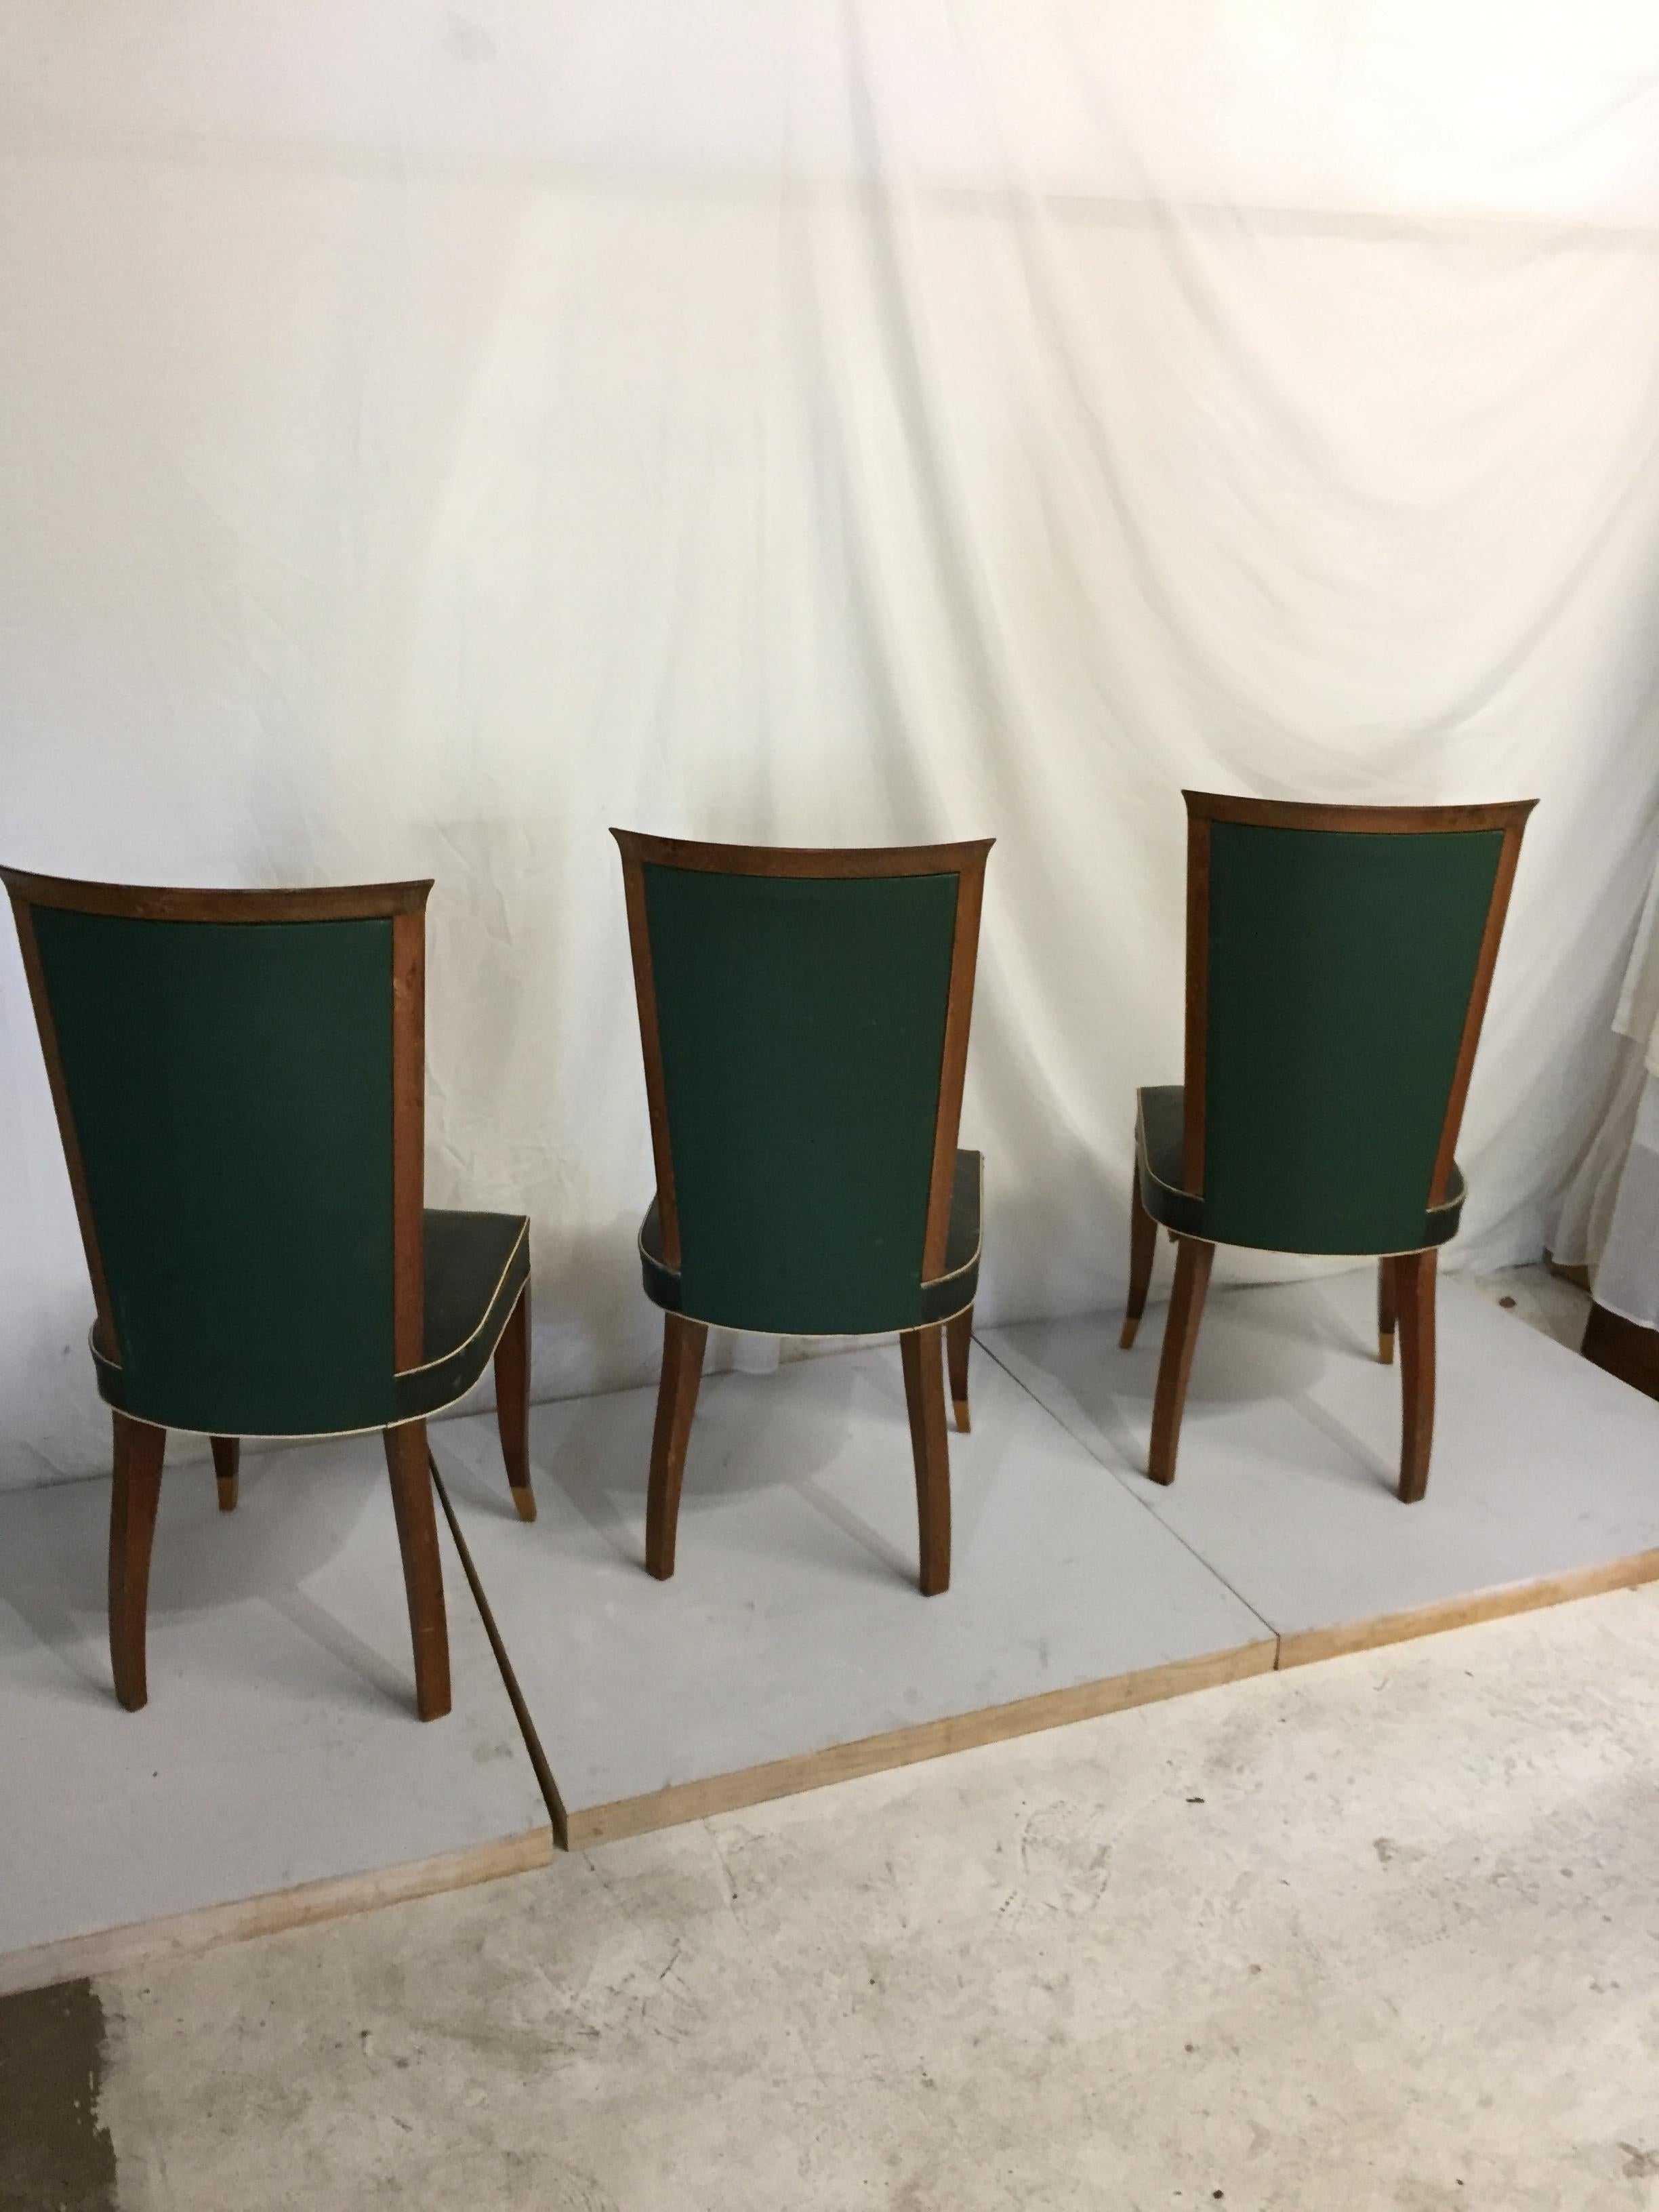 Mid-20th Century Six Art Deco Chairs in Green Leather Original Condition For Sale